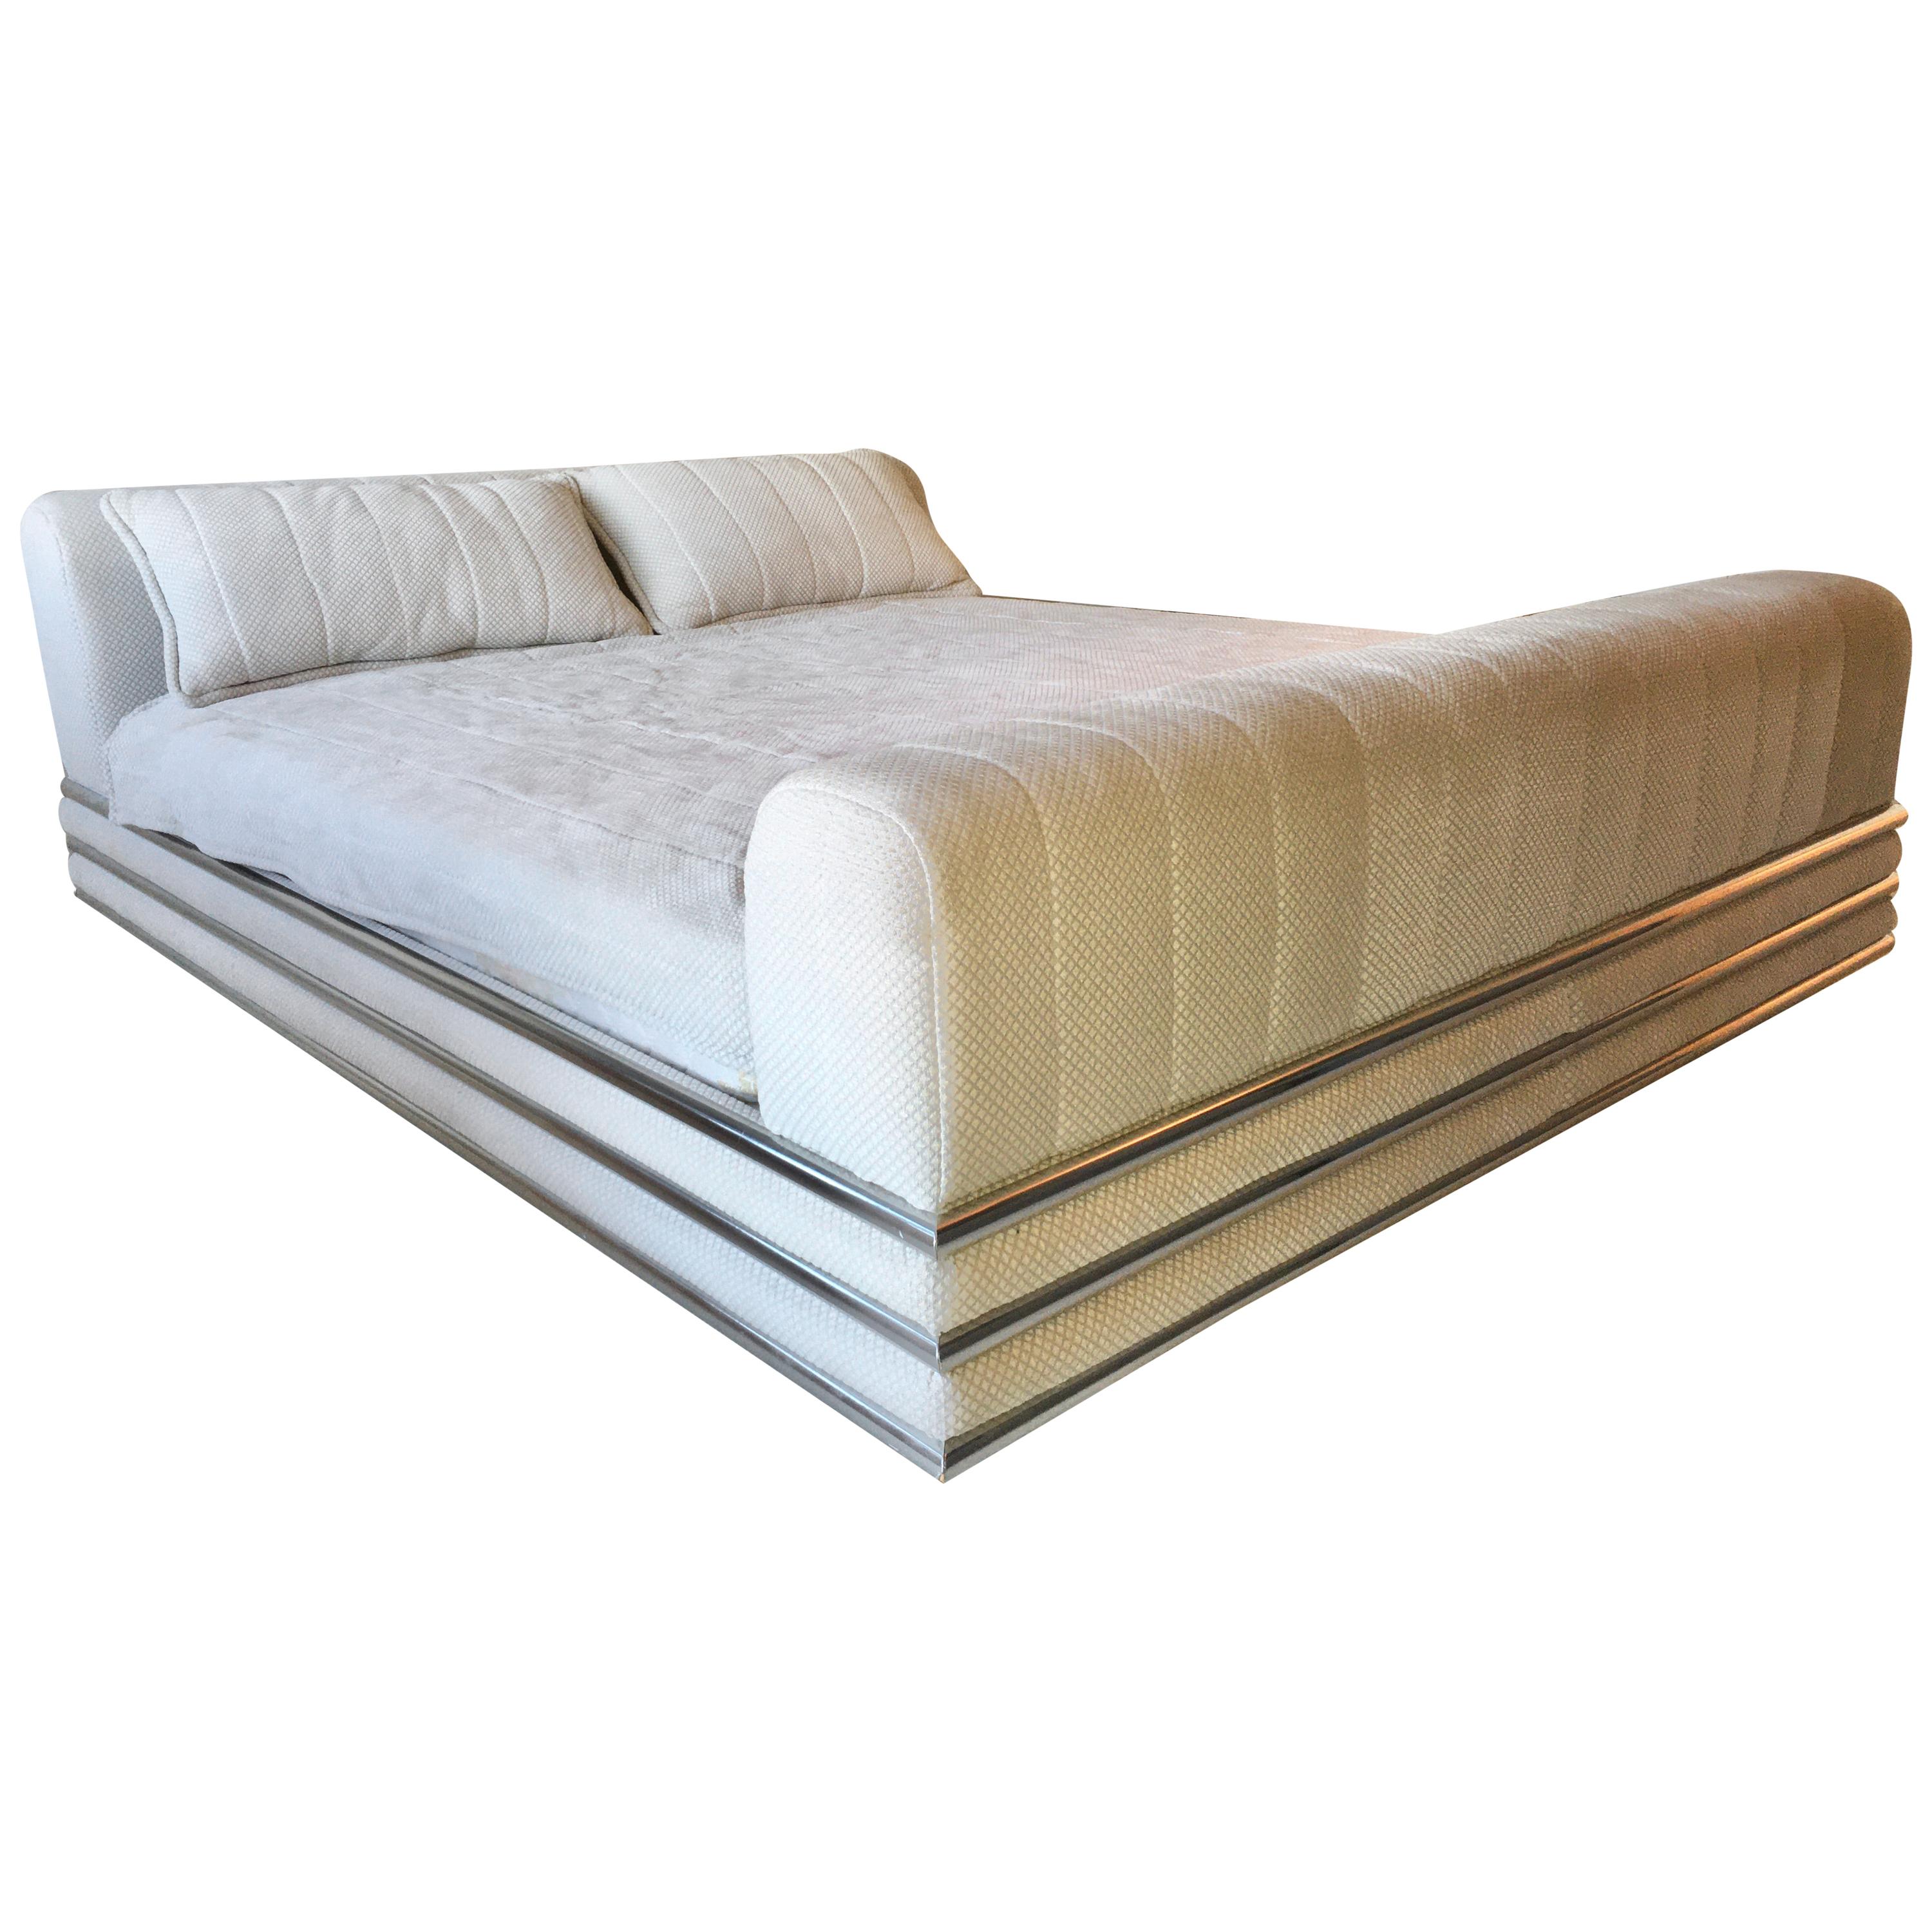 King Size Bed in Style of Brueton's Radiator Bed